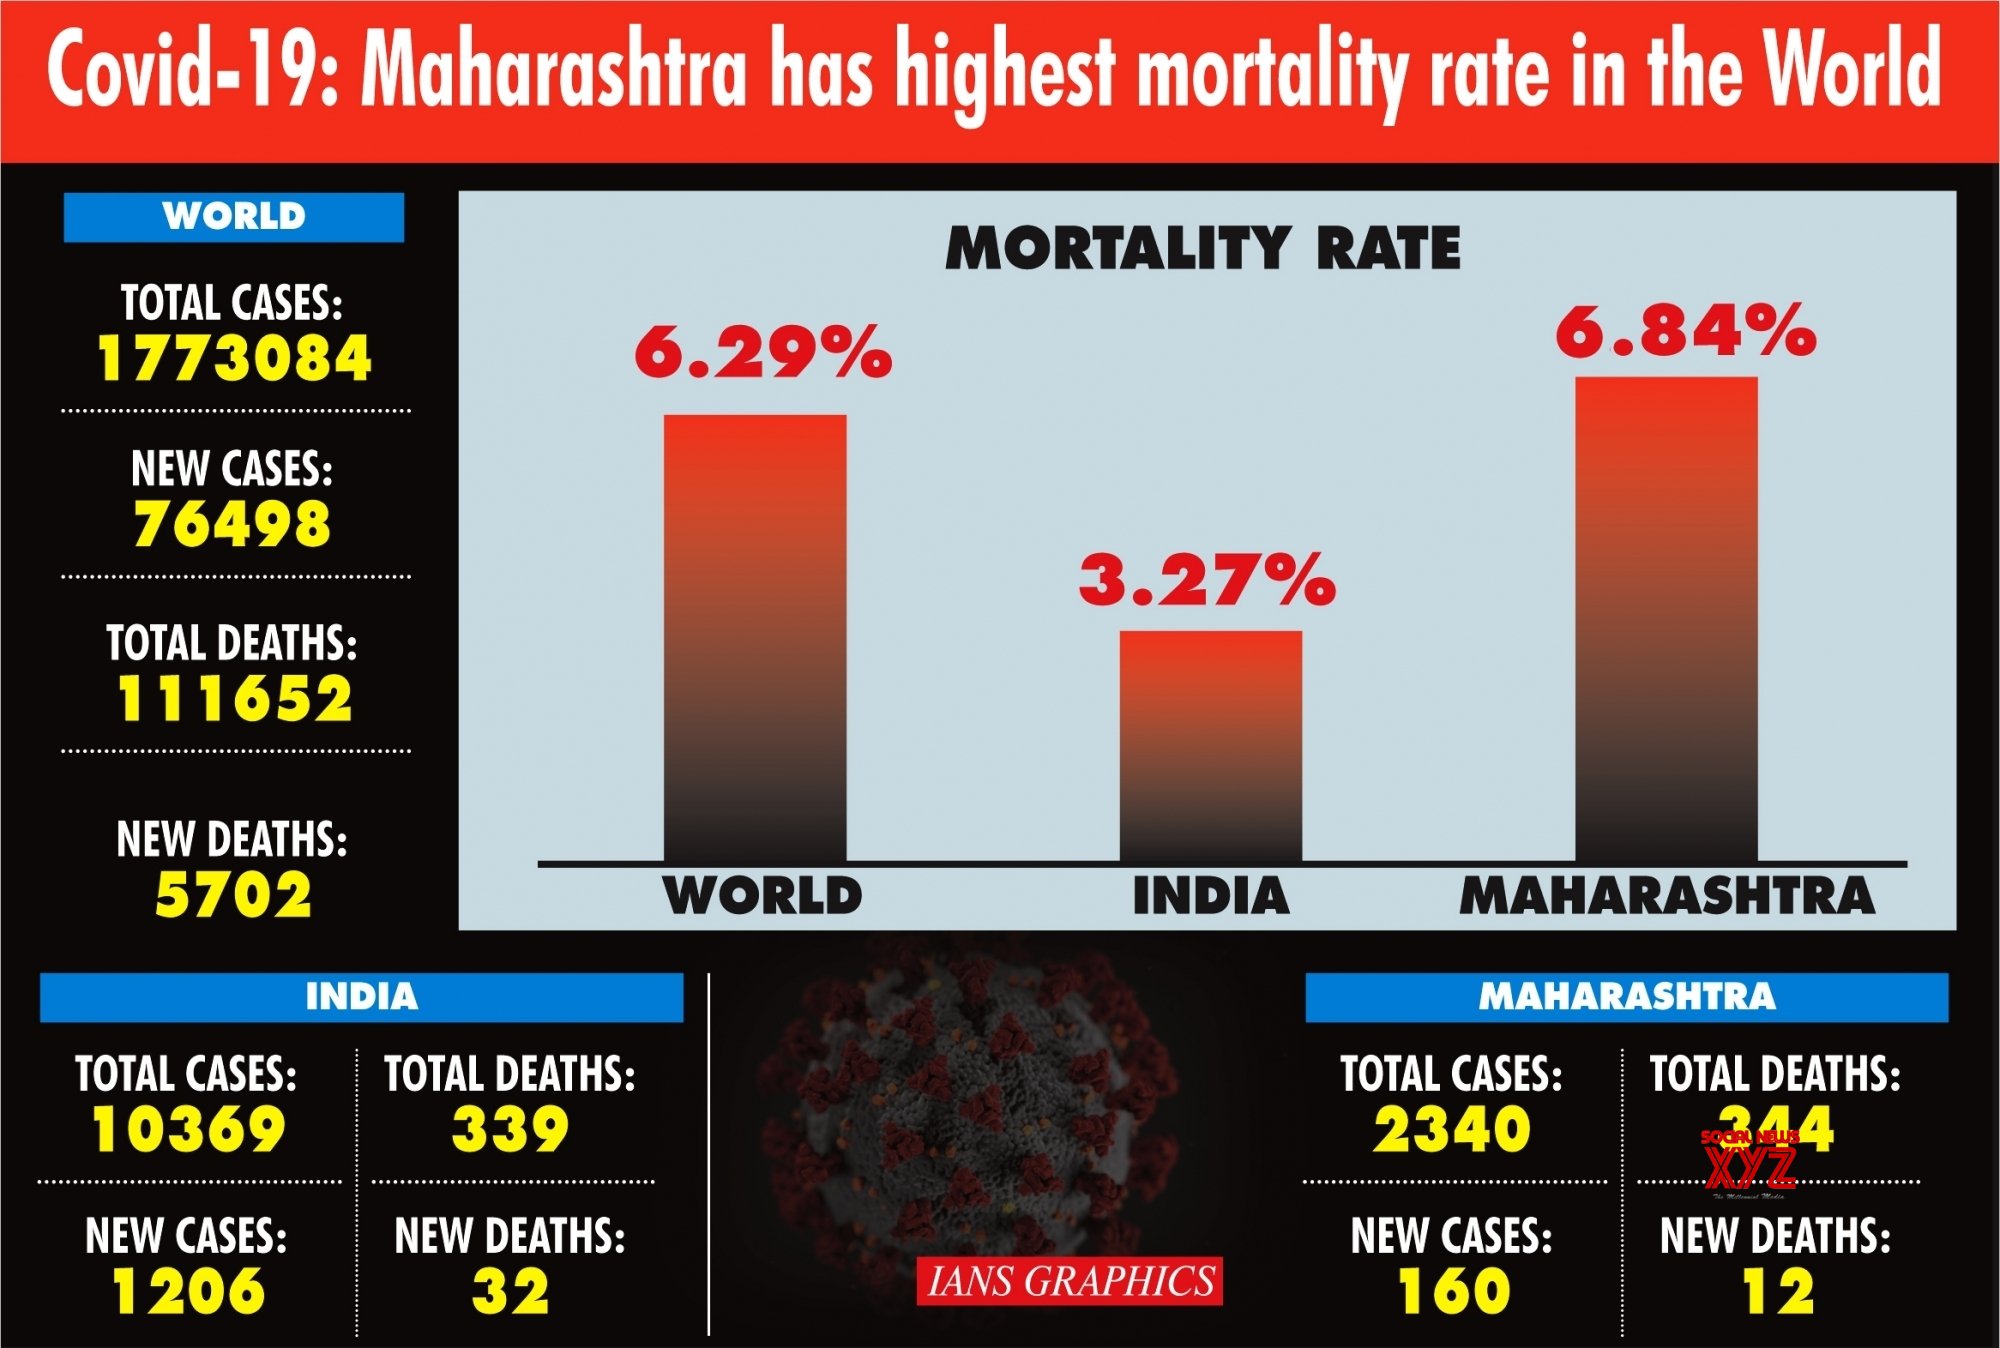 Maha Covid-19 mortality rate highest in the world! 